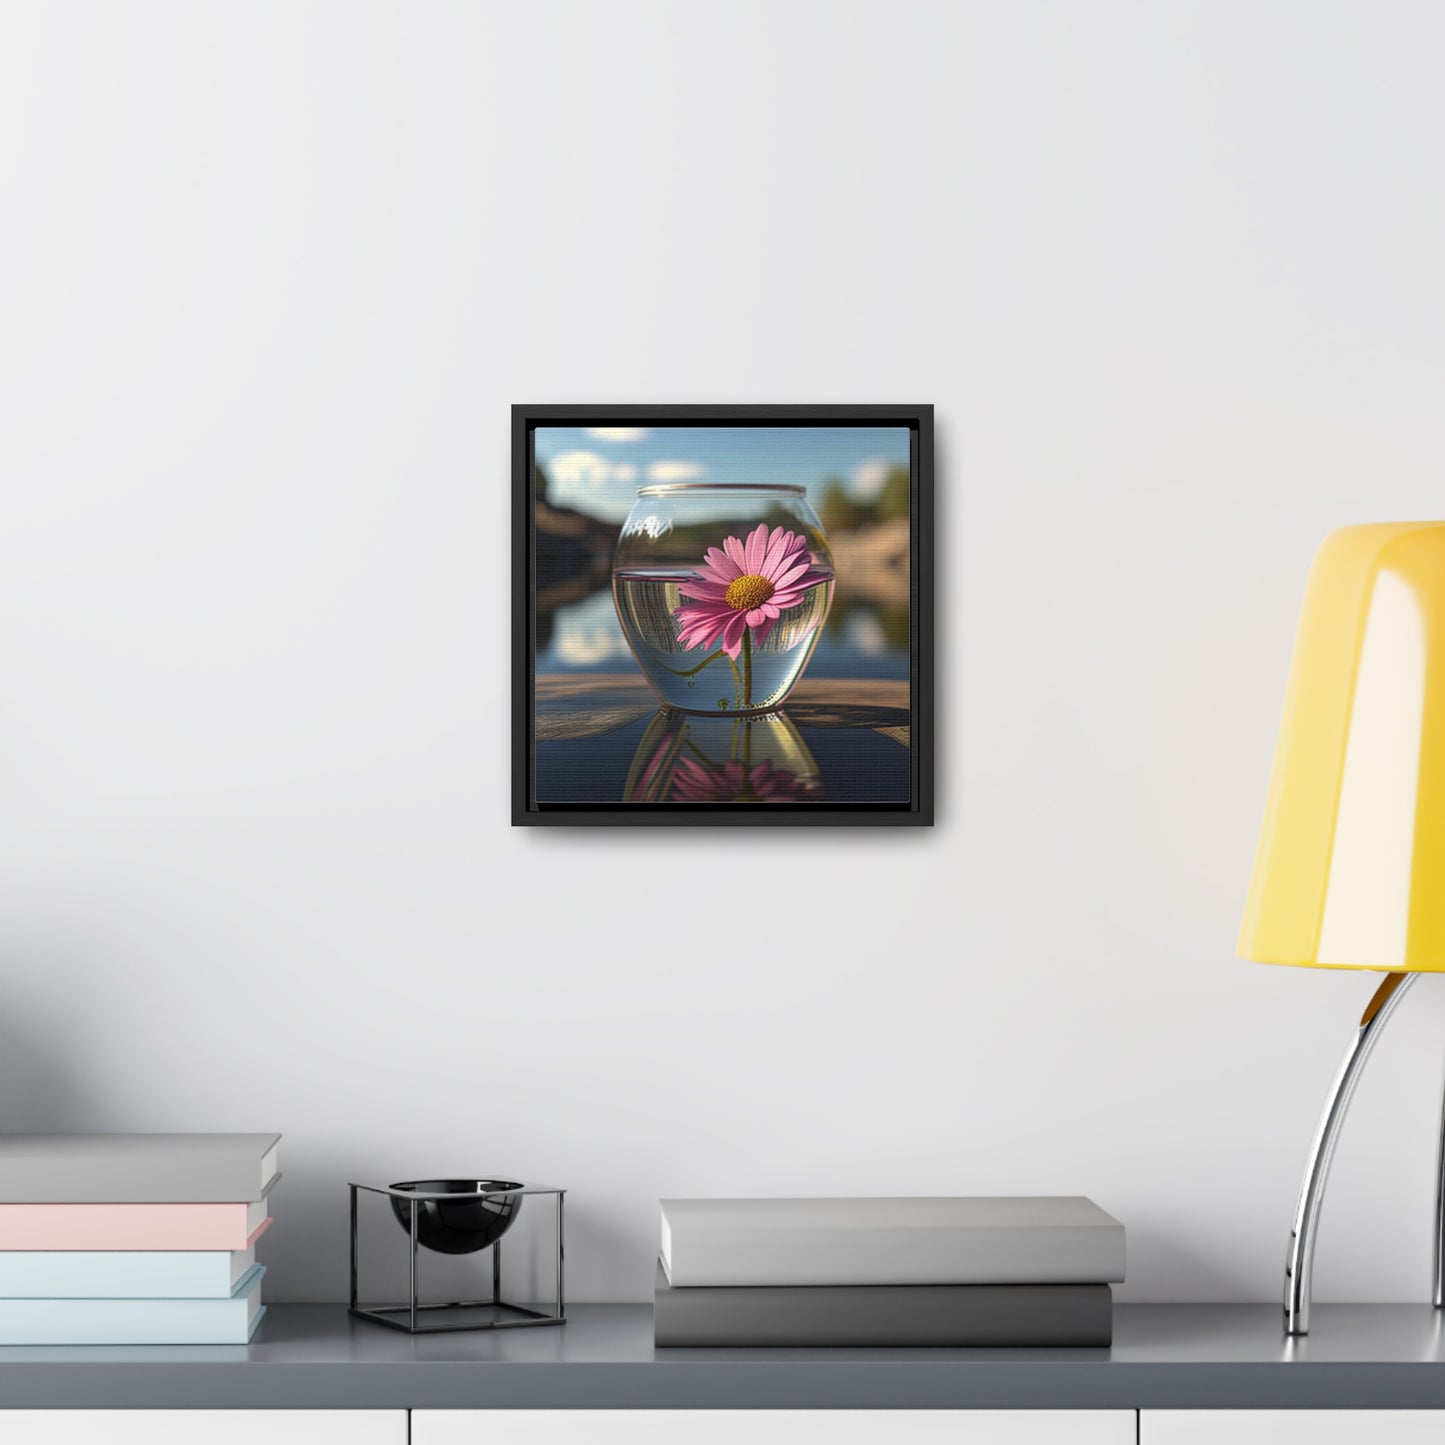 Gallery Canvas Wraps, Square Frame Pink Daisy 3